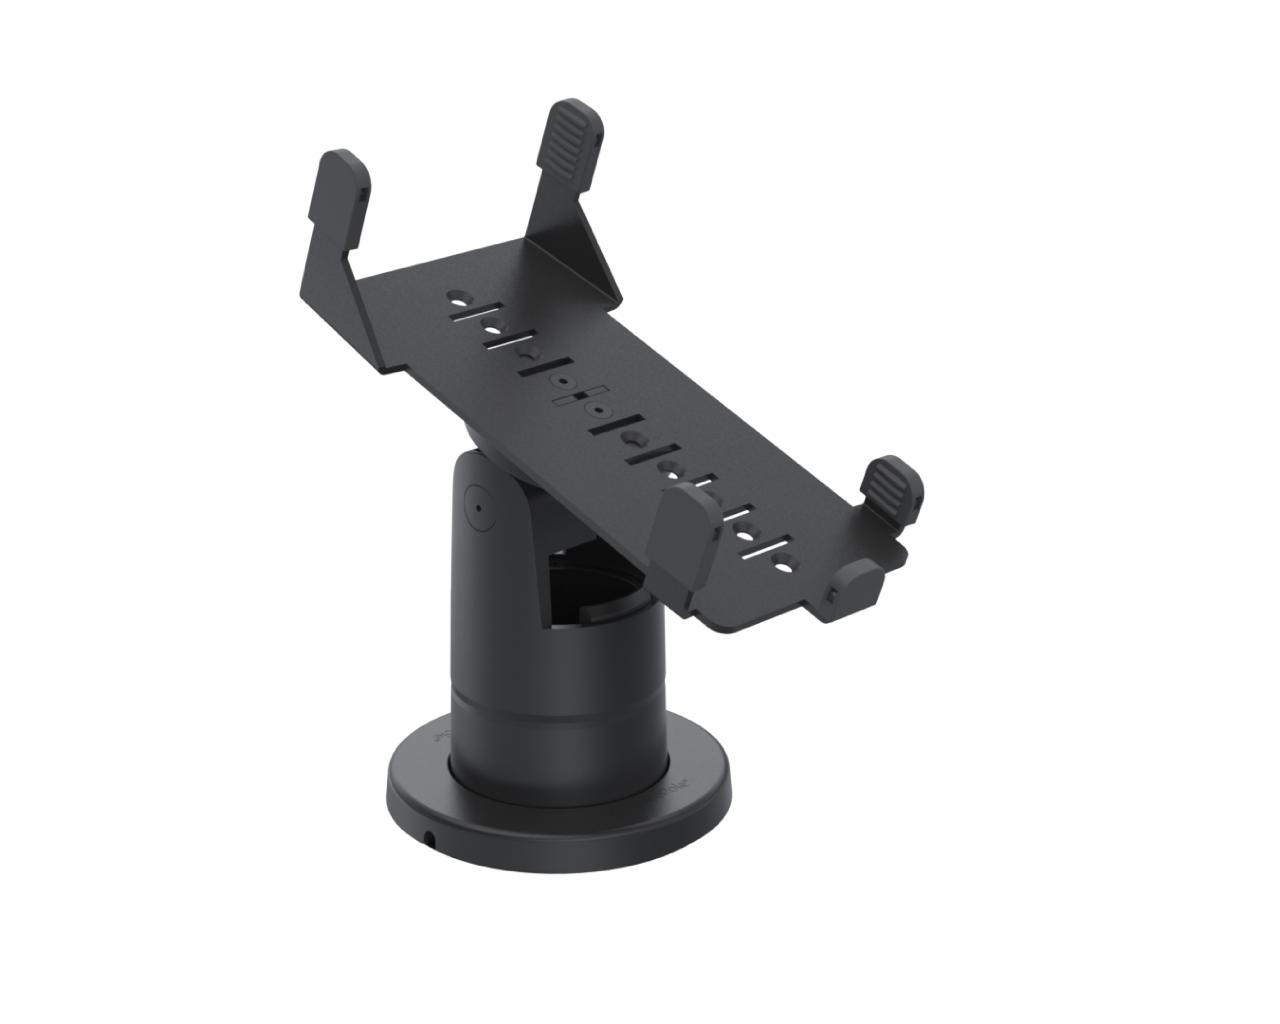 SpacePole Stack with MultiGrip plate for Verifone VX520